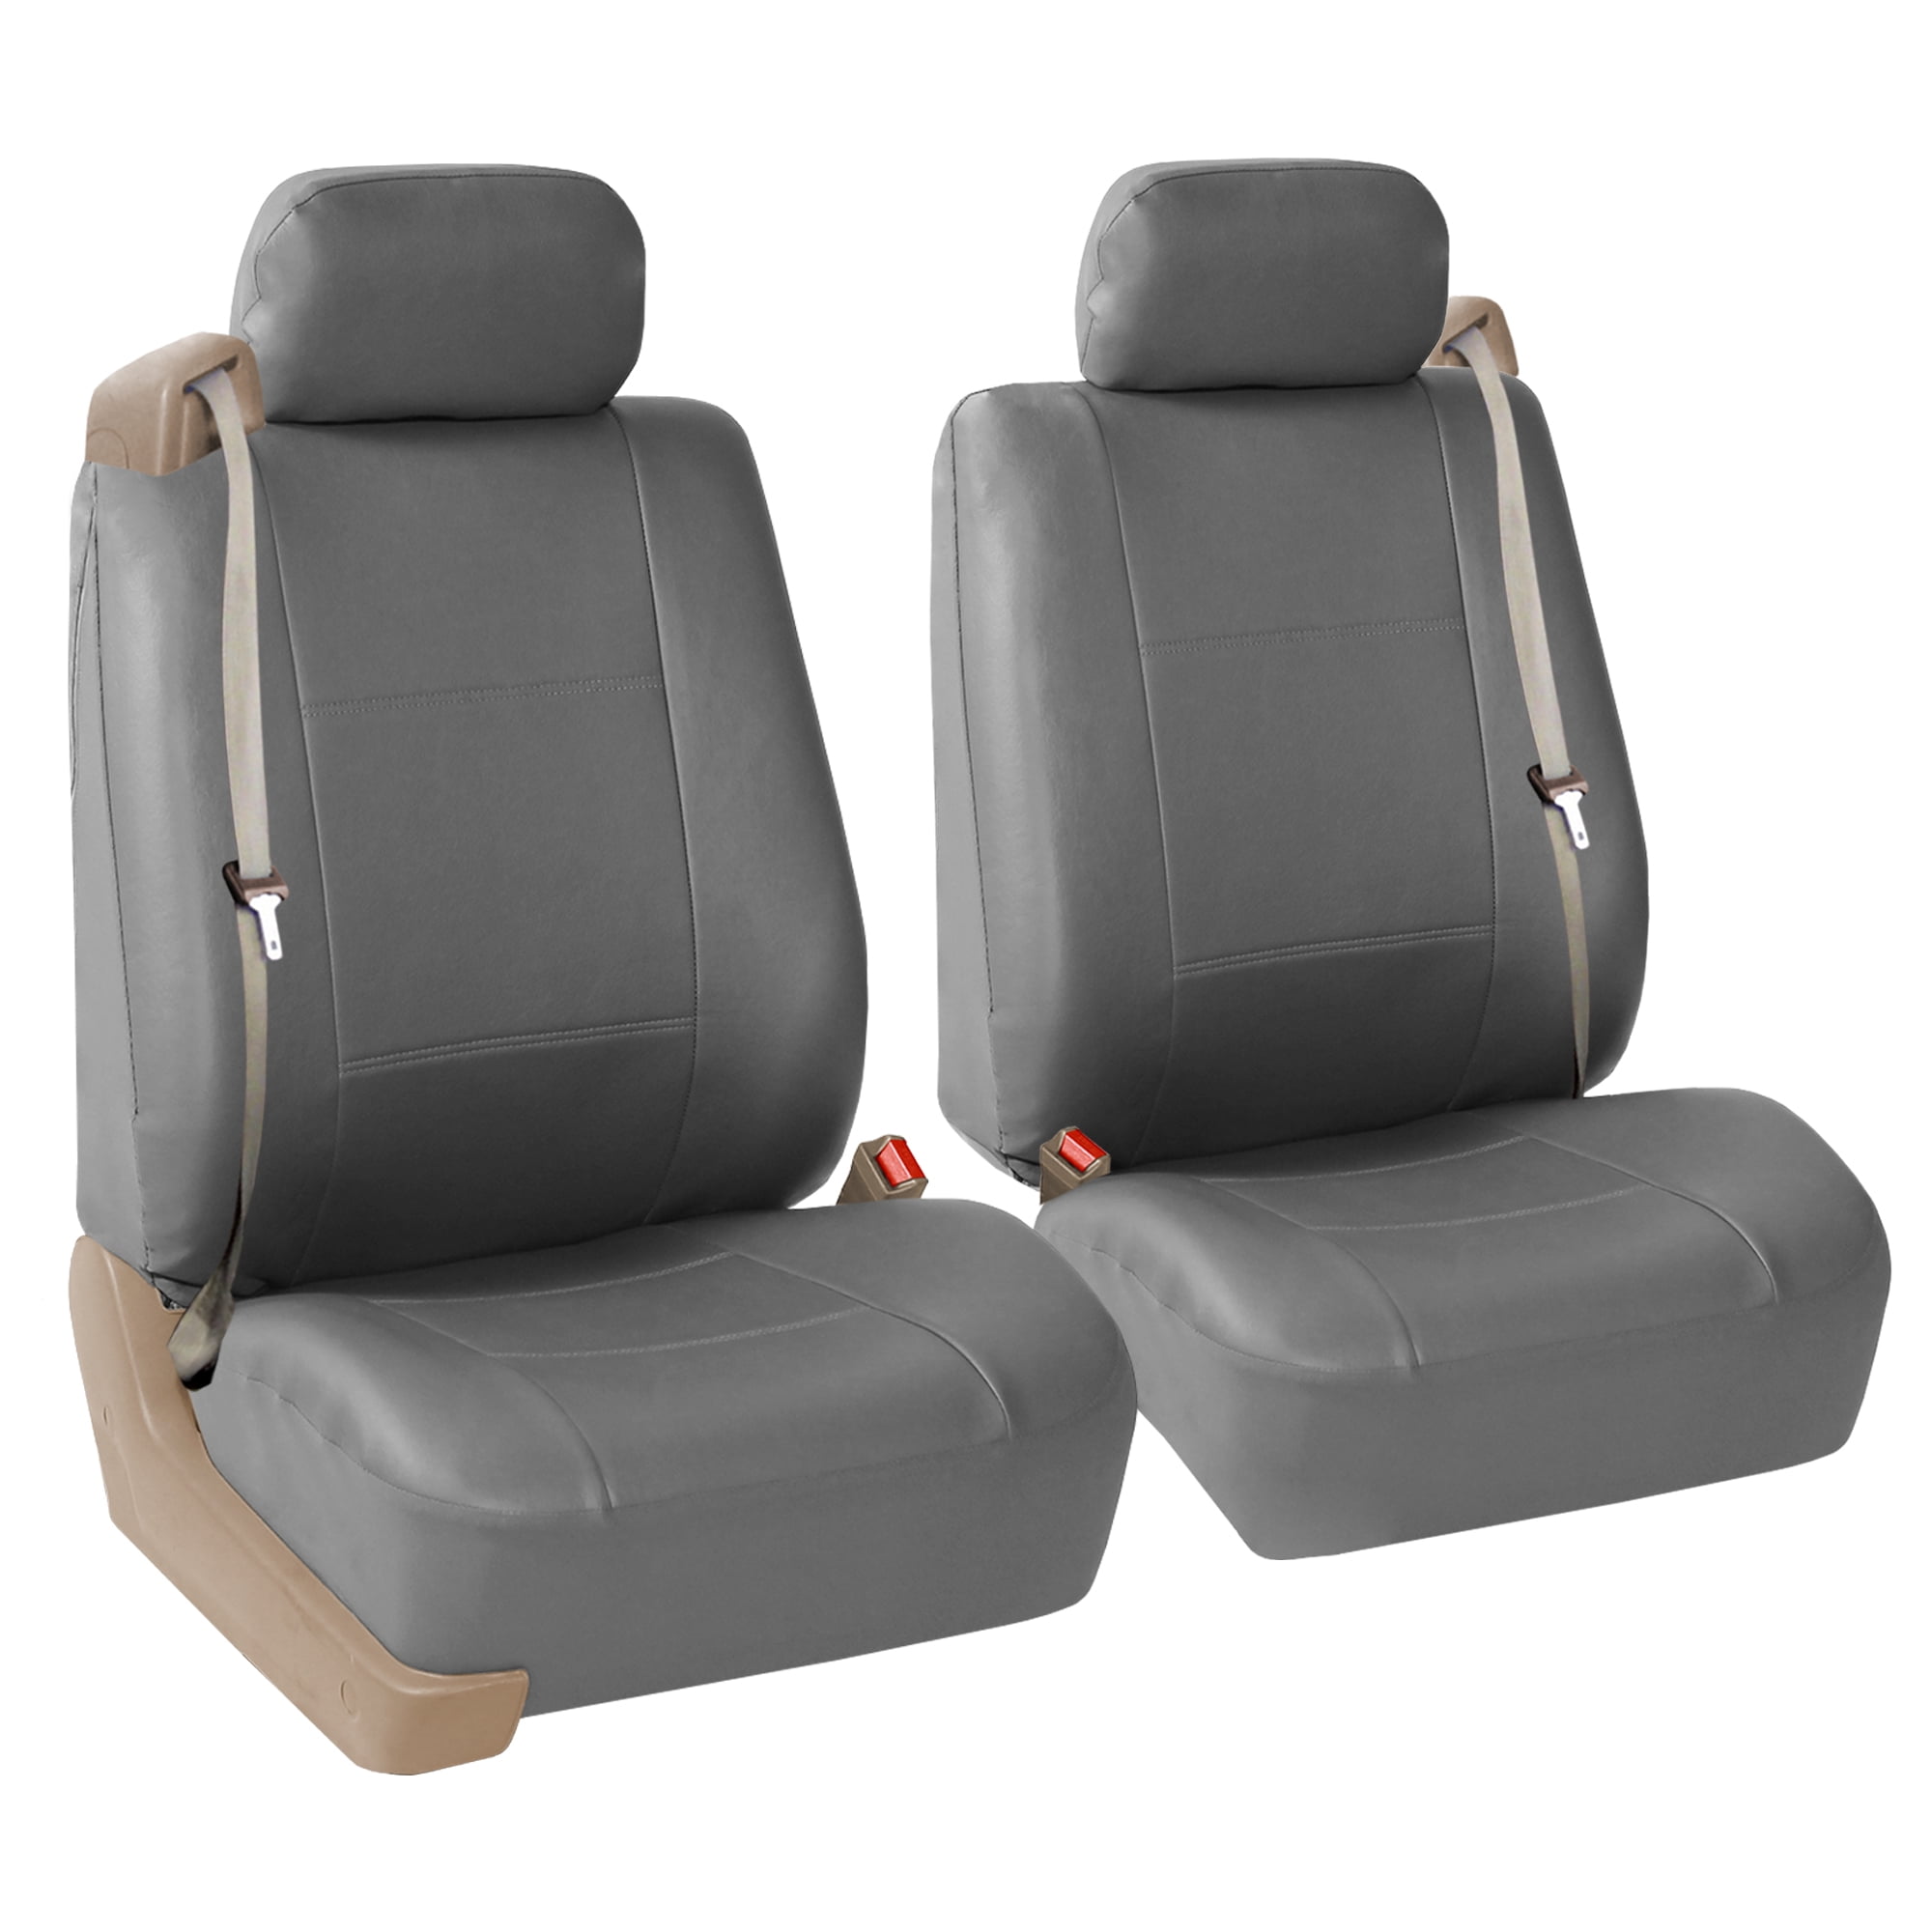 TAPHA Executive Leatherette Car Seat Cover & Cushion Set, Breathable and  Water-Resistant, Universal Fit for Car SUV & Truck (Front Seats Only,  Beige)